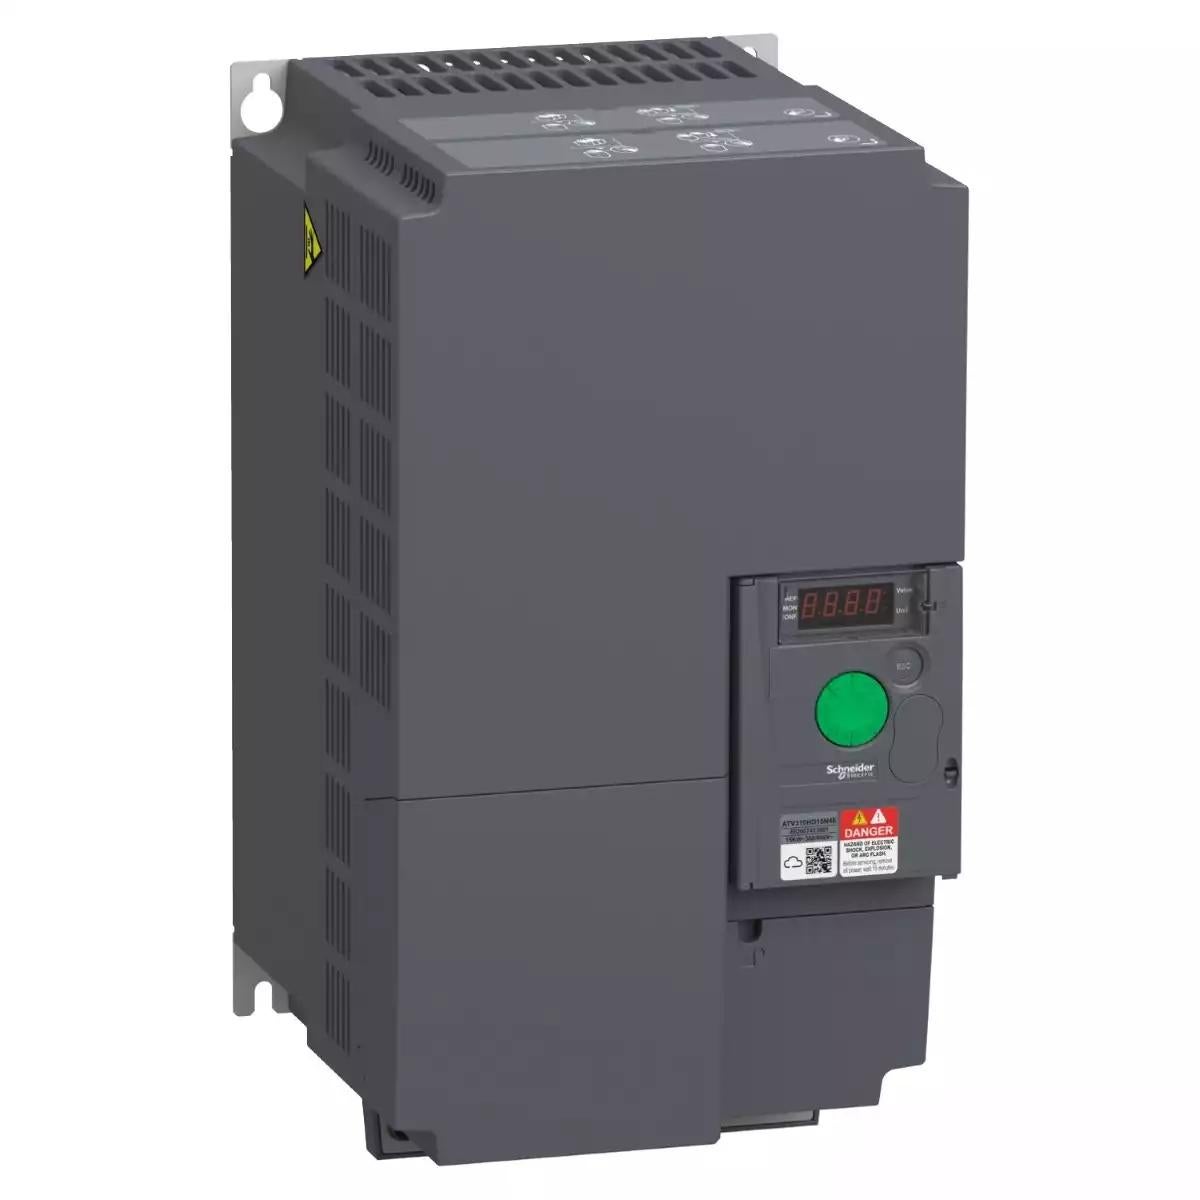 Schneider Electric variable speed drive ATV310, 15 kW, 20 hp, 380...460 V, 3 phase, without filter